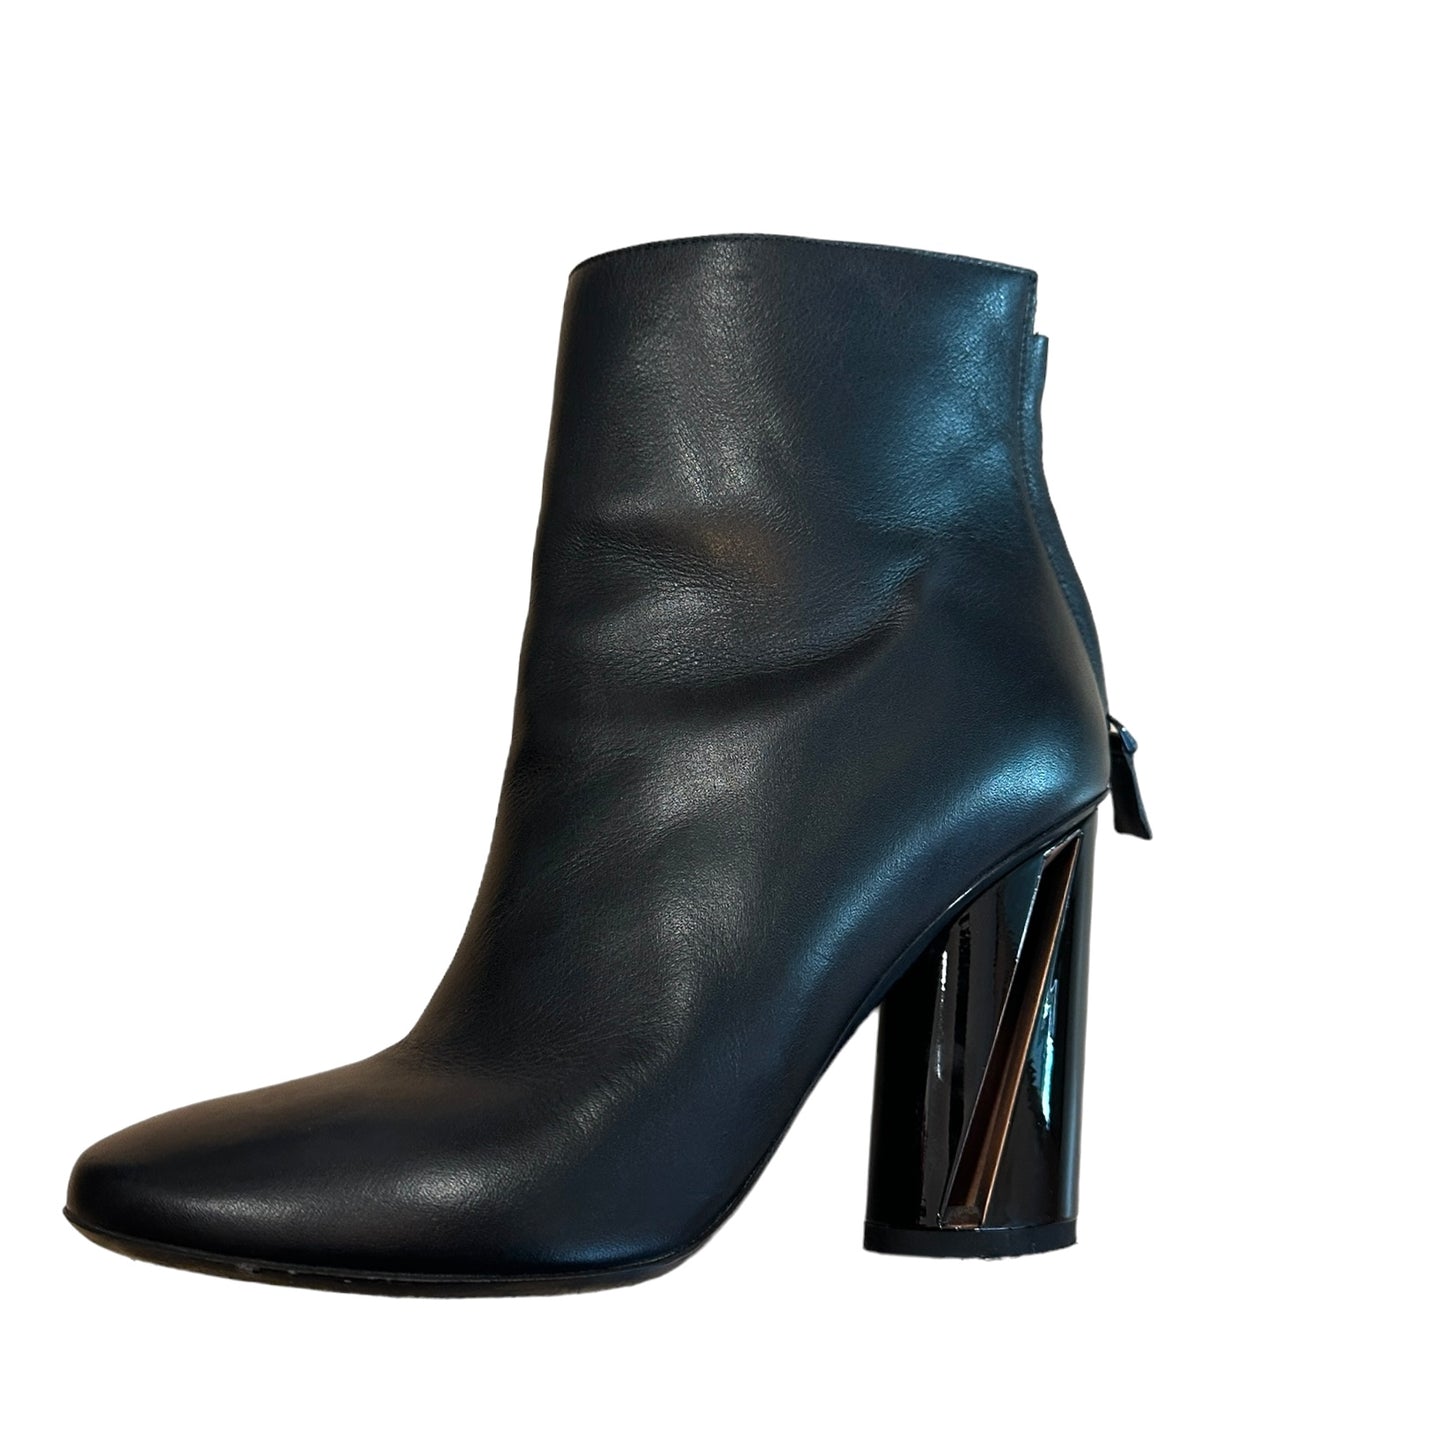 Black Leather Heeled Boots - 8